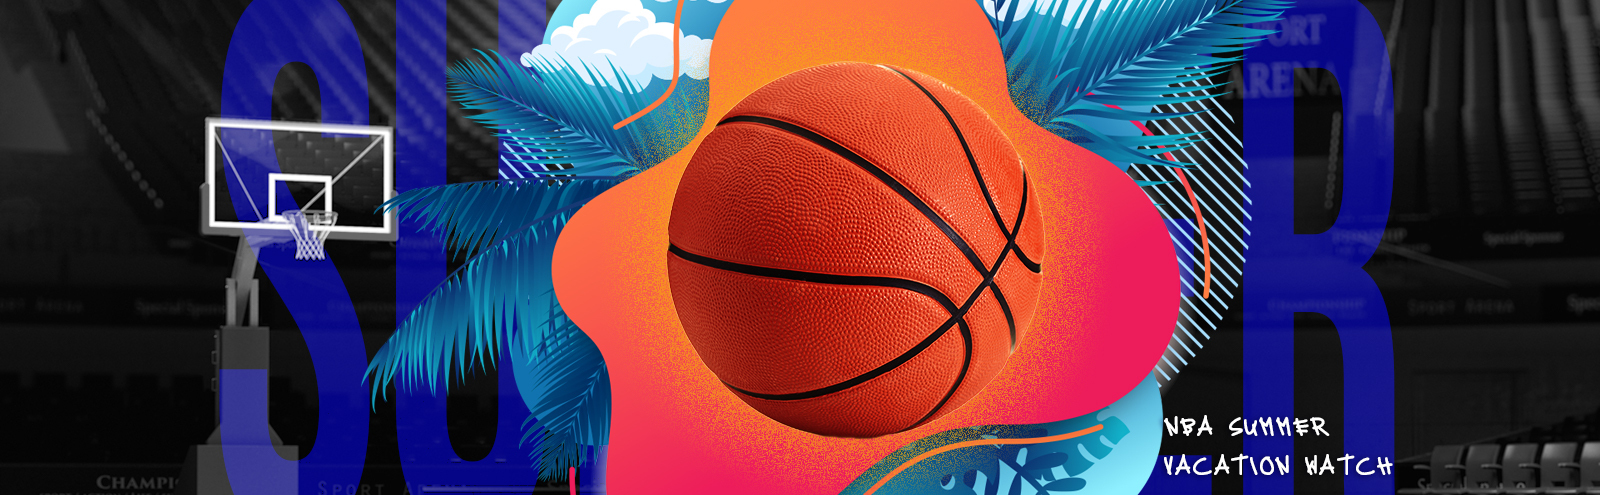 NBA Summer Vacation Watch: No Old Beach, Here